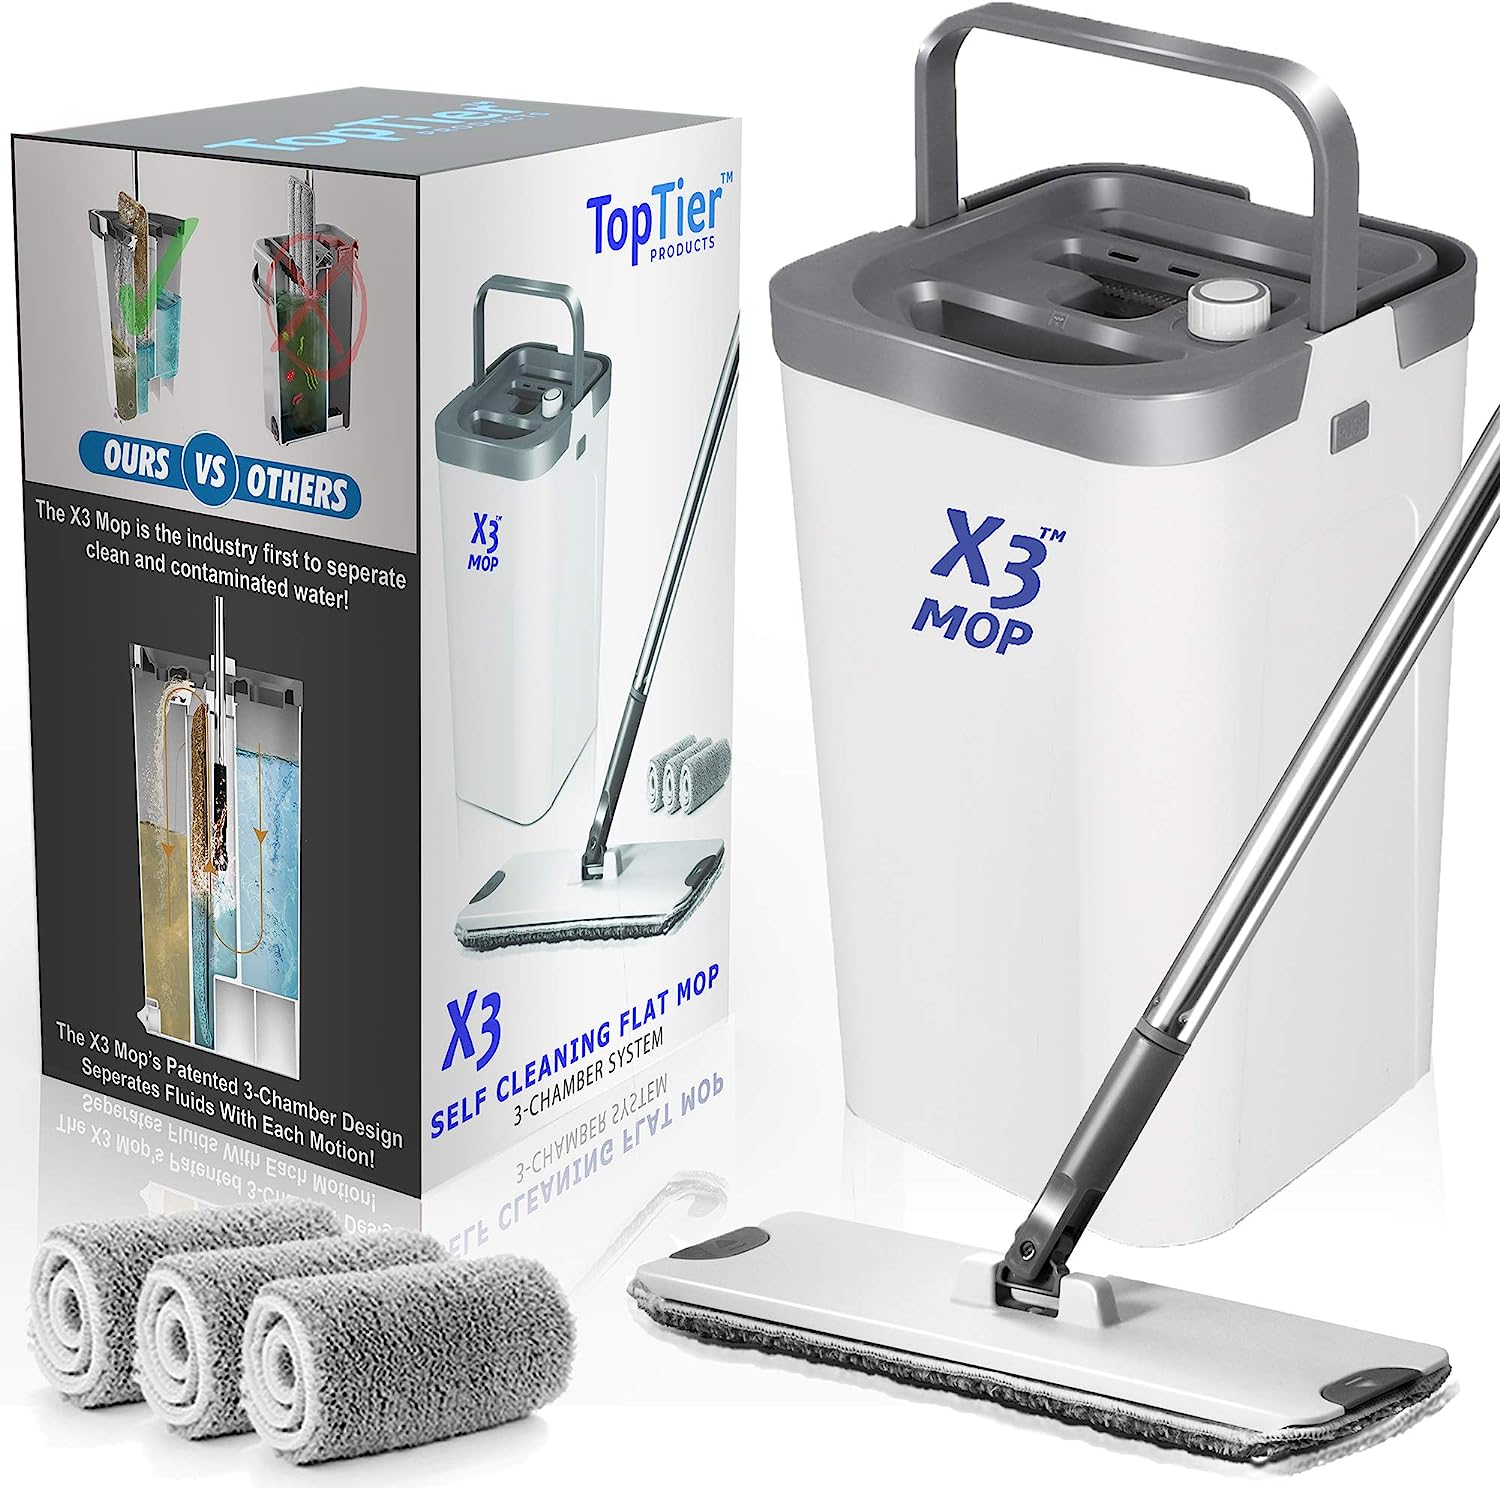 X3 Mop, Separates Dirty and Clean Water, 3-Chamber [...]